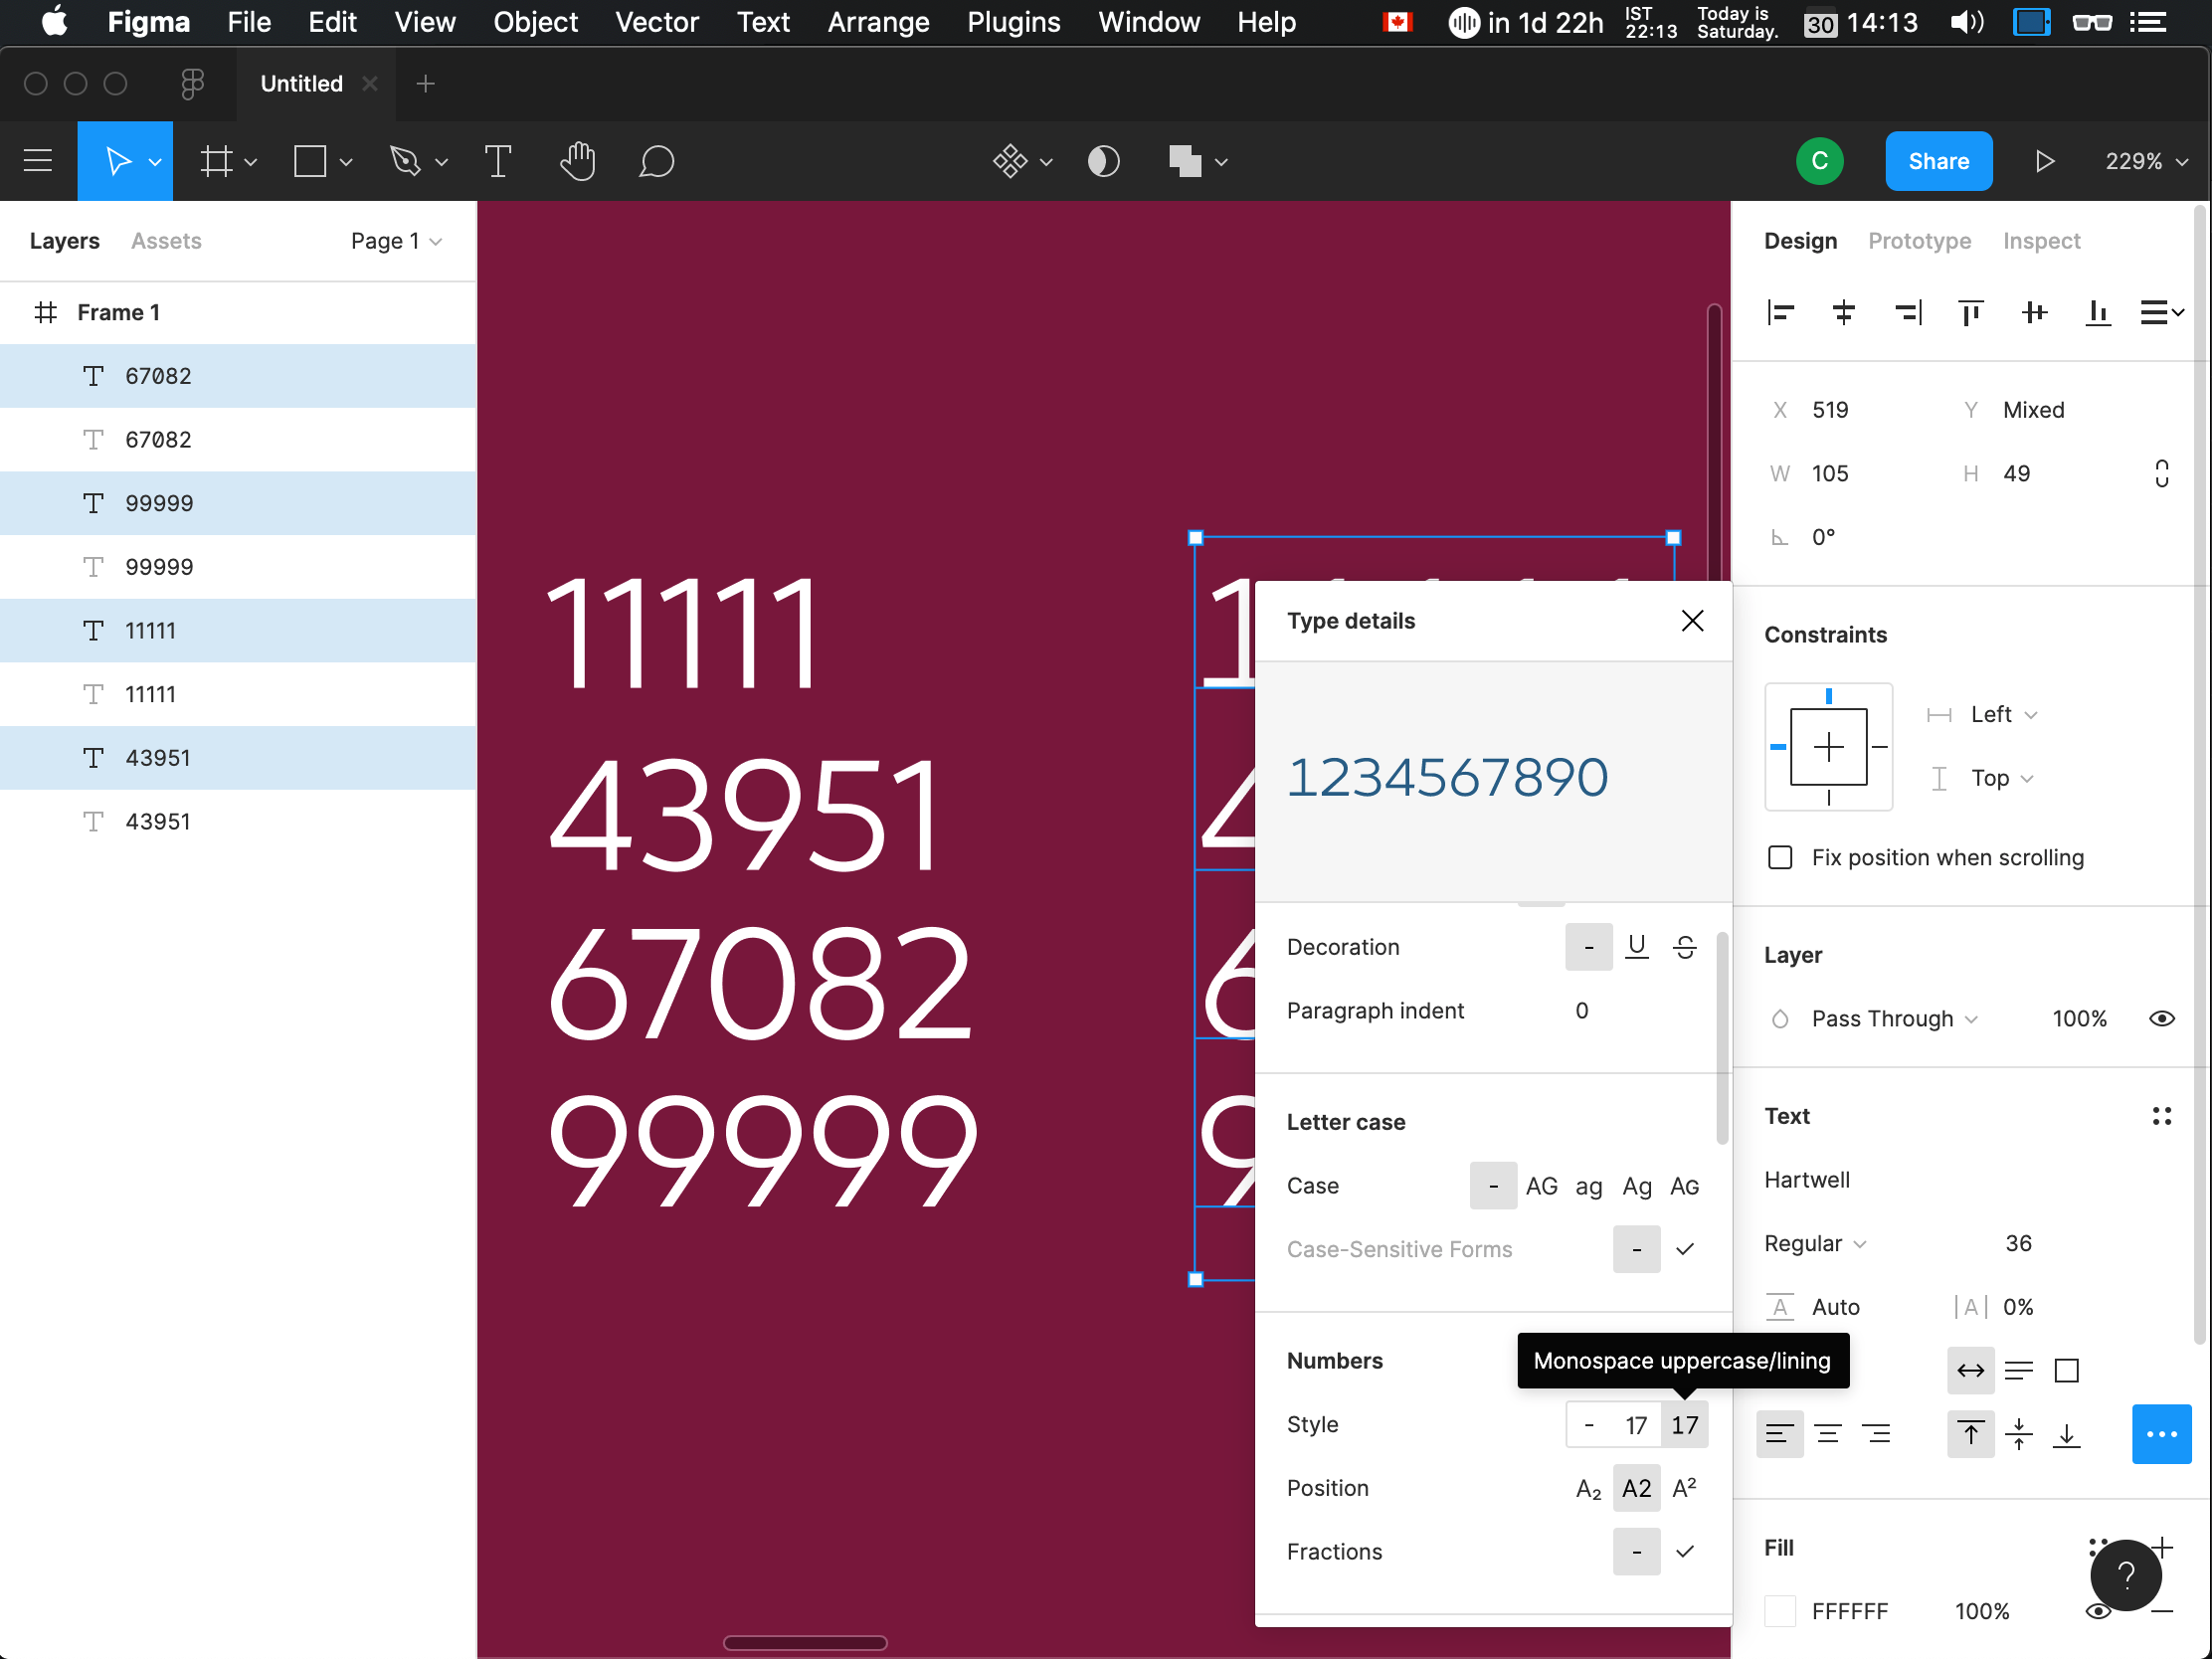 Settings to apply tabular numbers to selected elements in Figma.